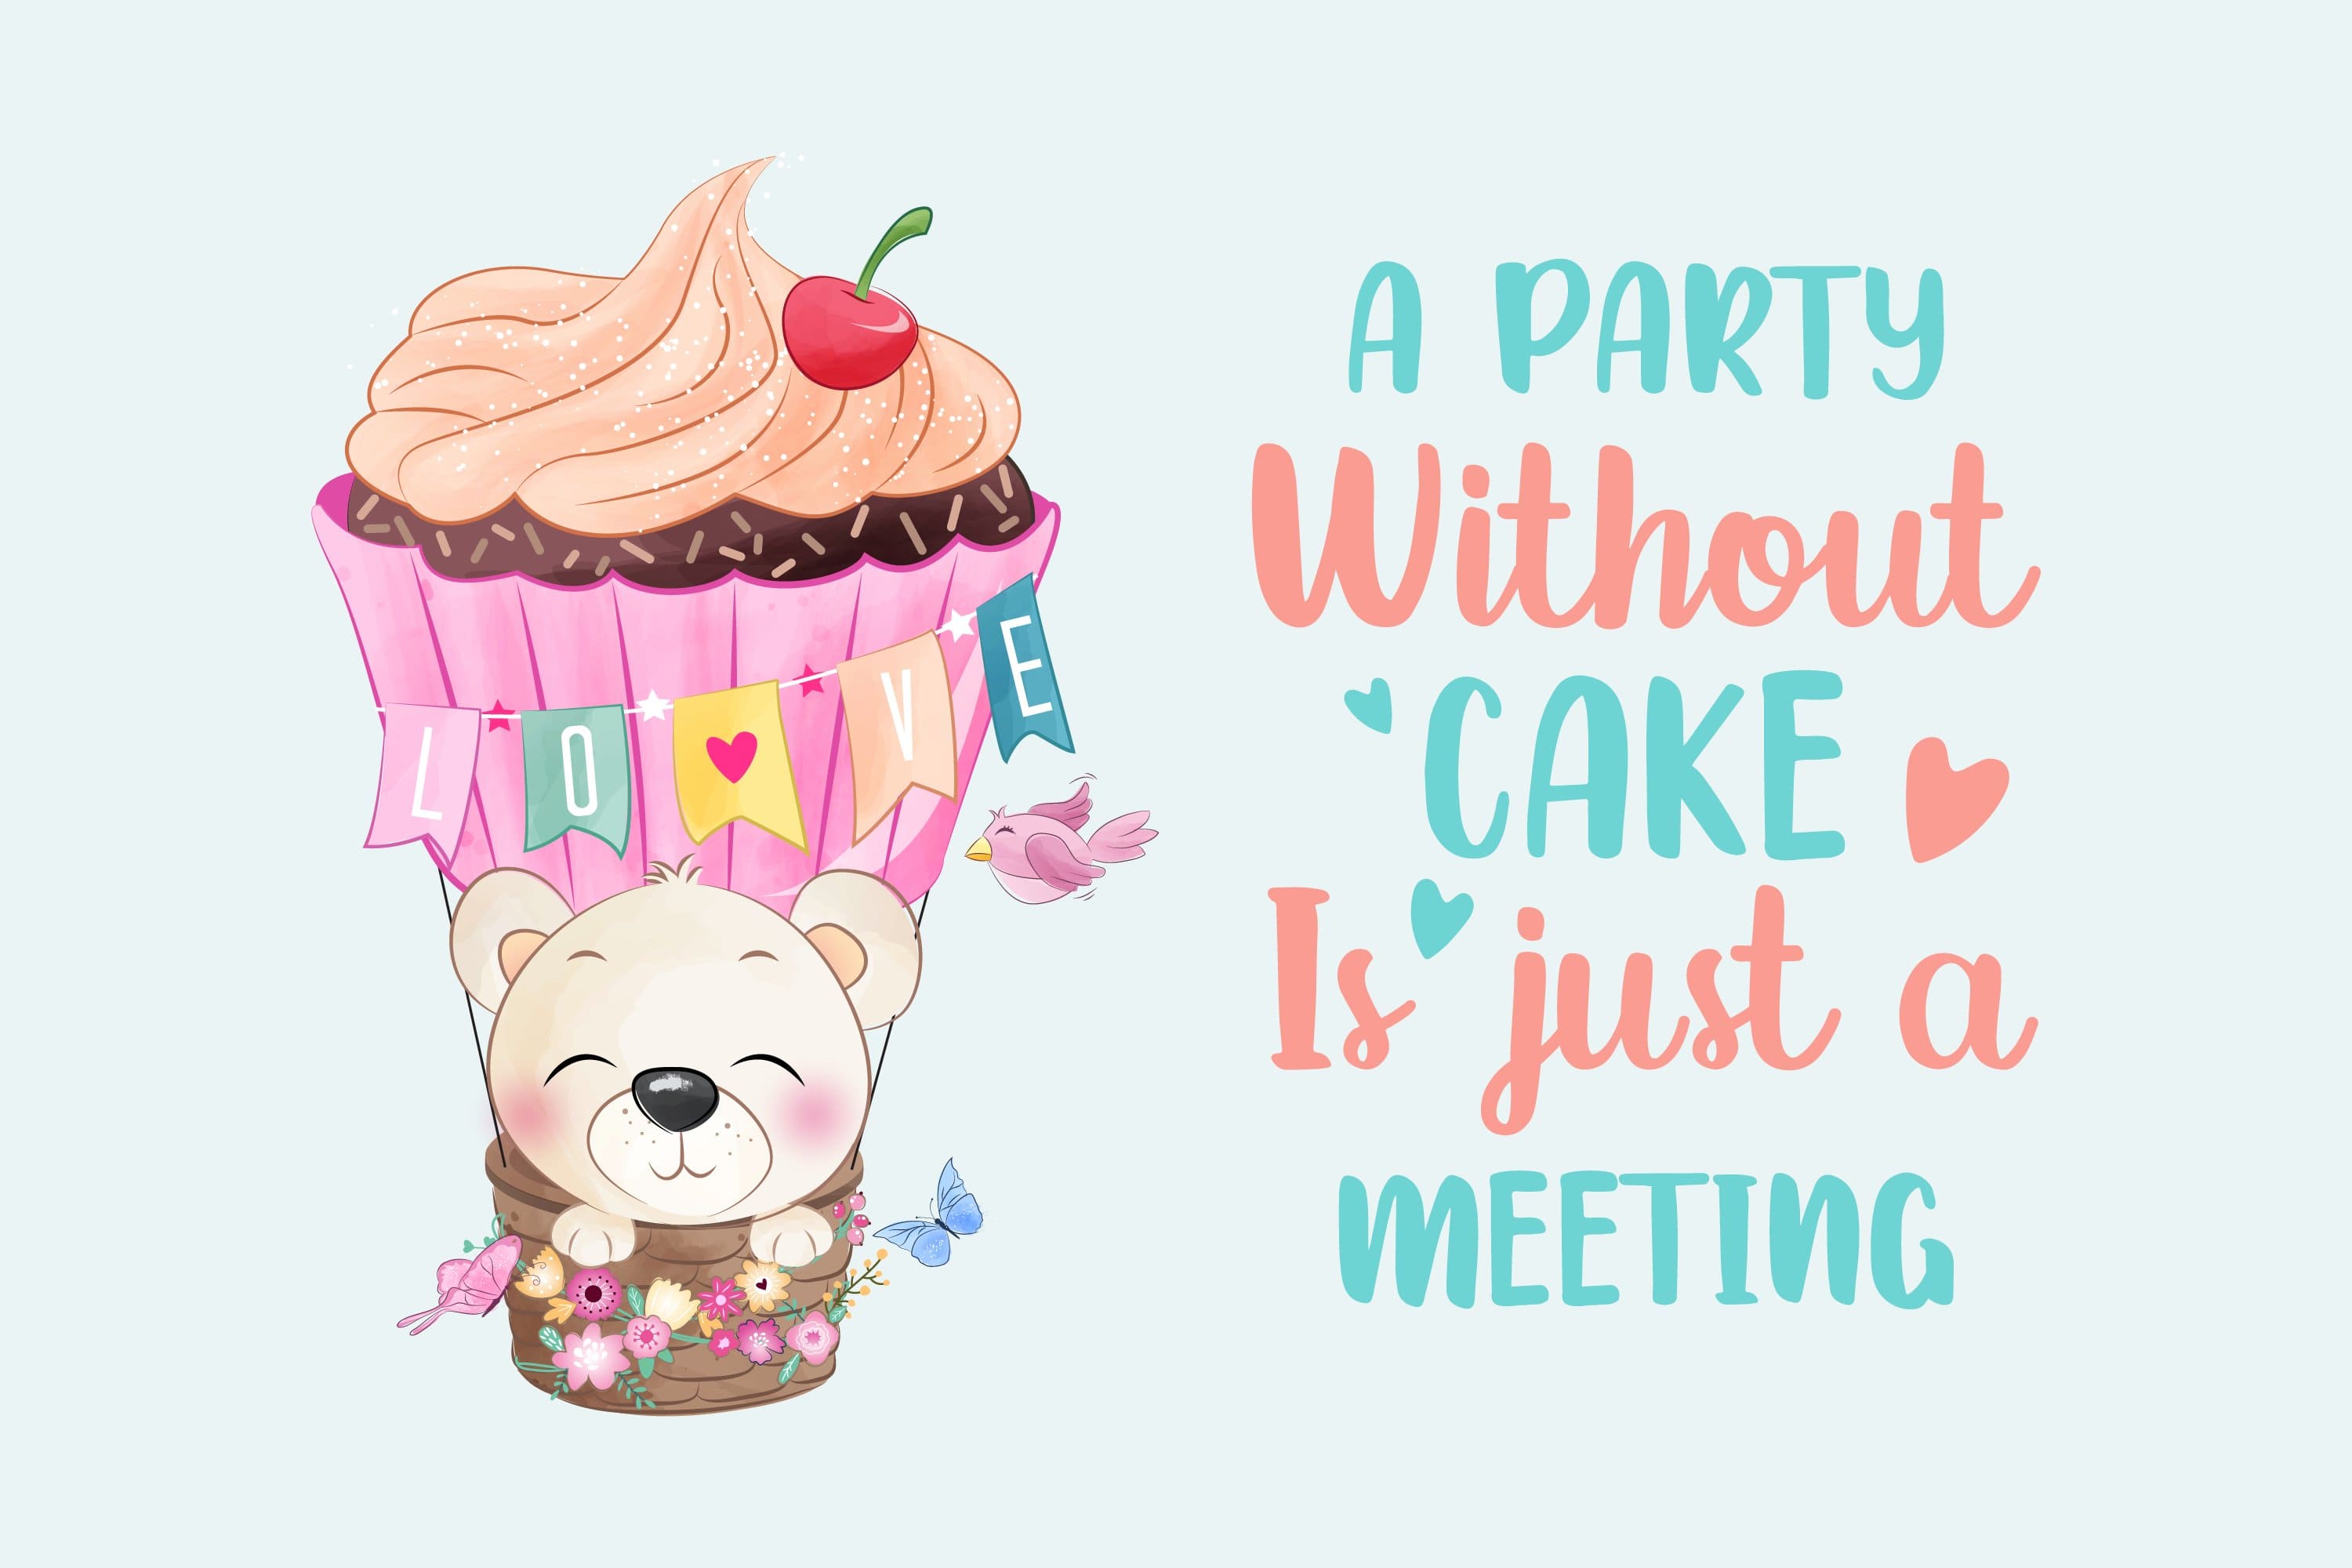 Image of a pink cup with a white bear with a sweet dessert in the middle and the inscription "A party without cake is just a meeting".